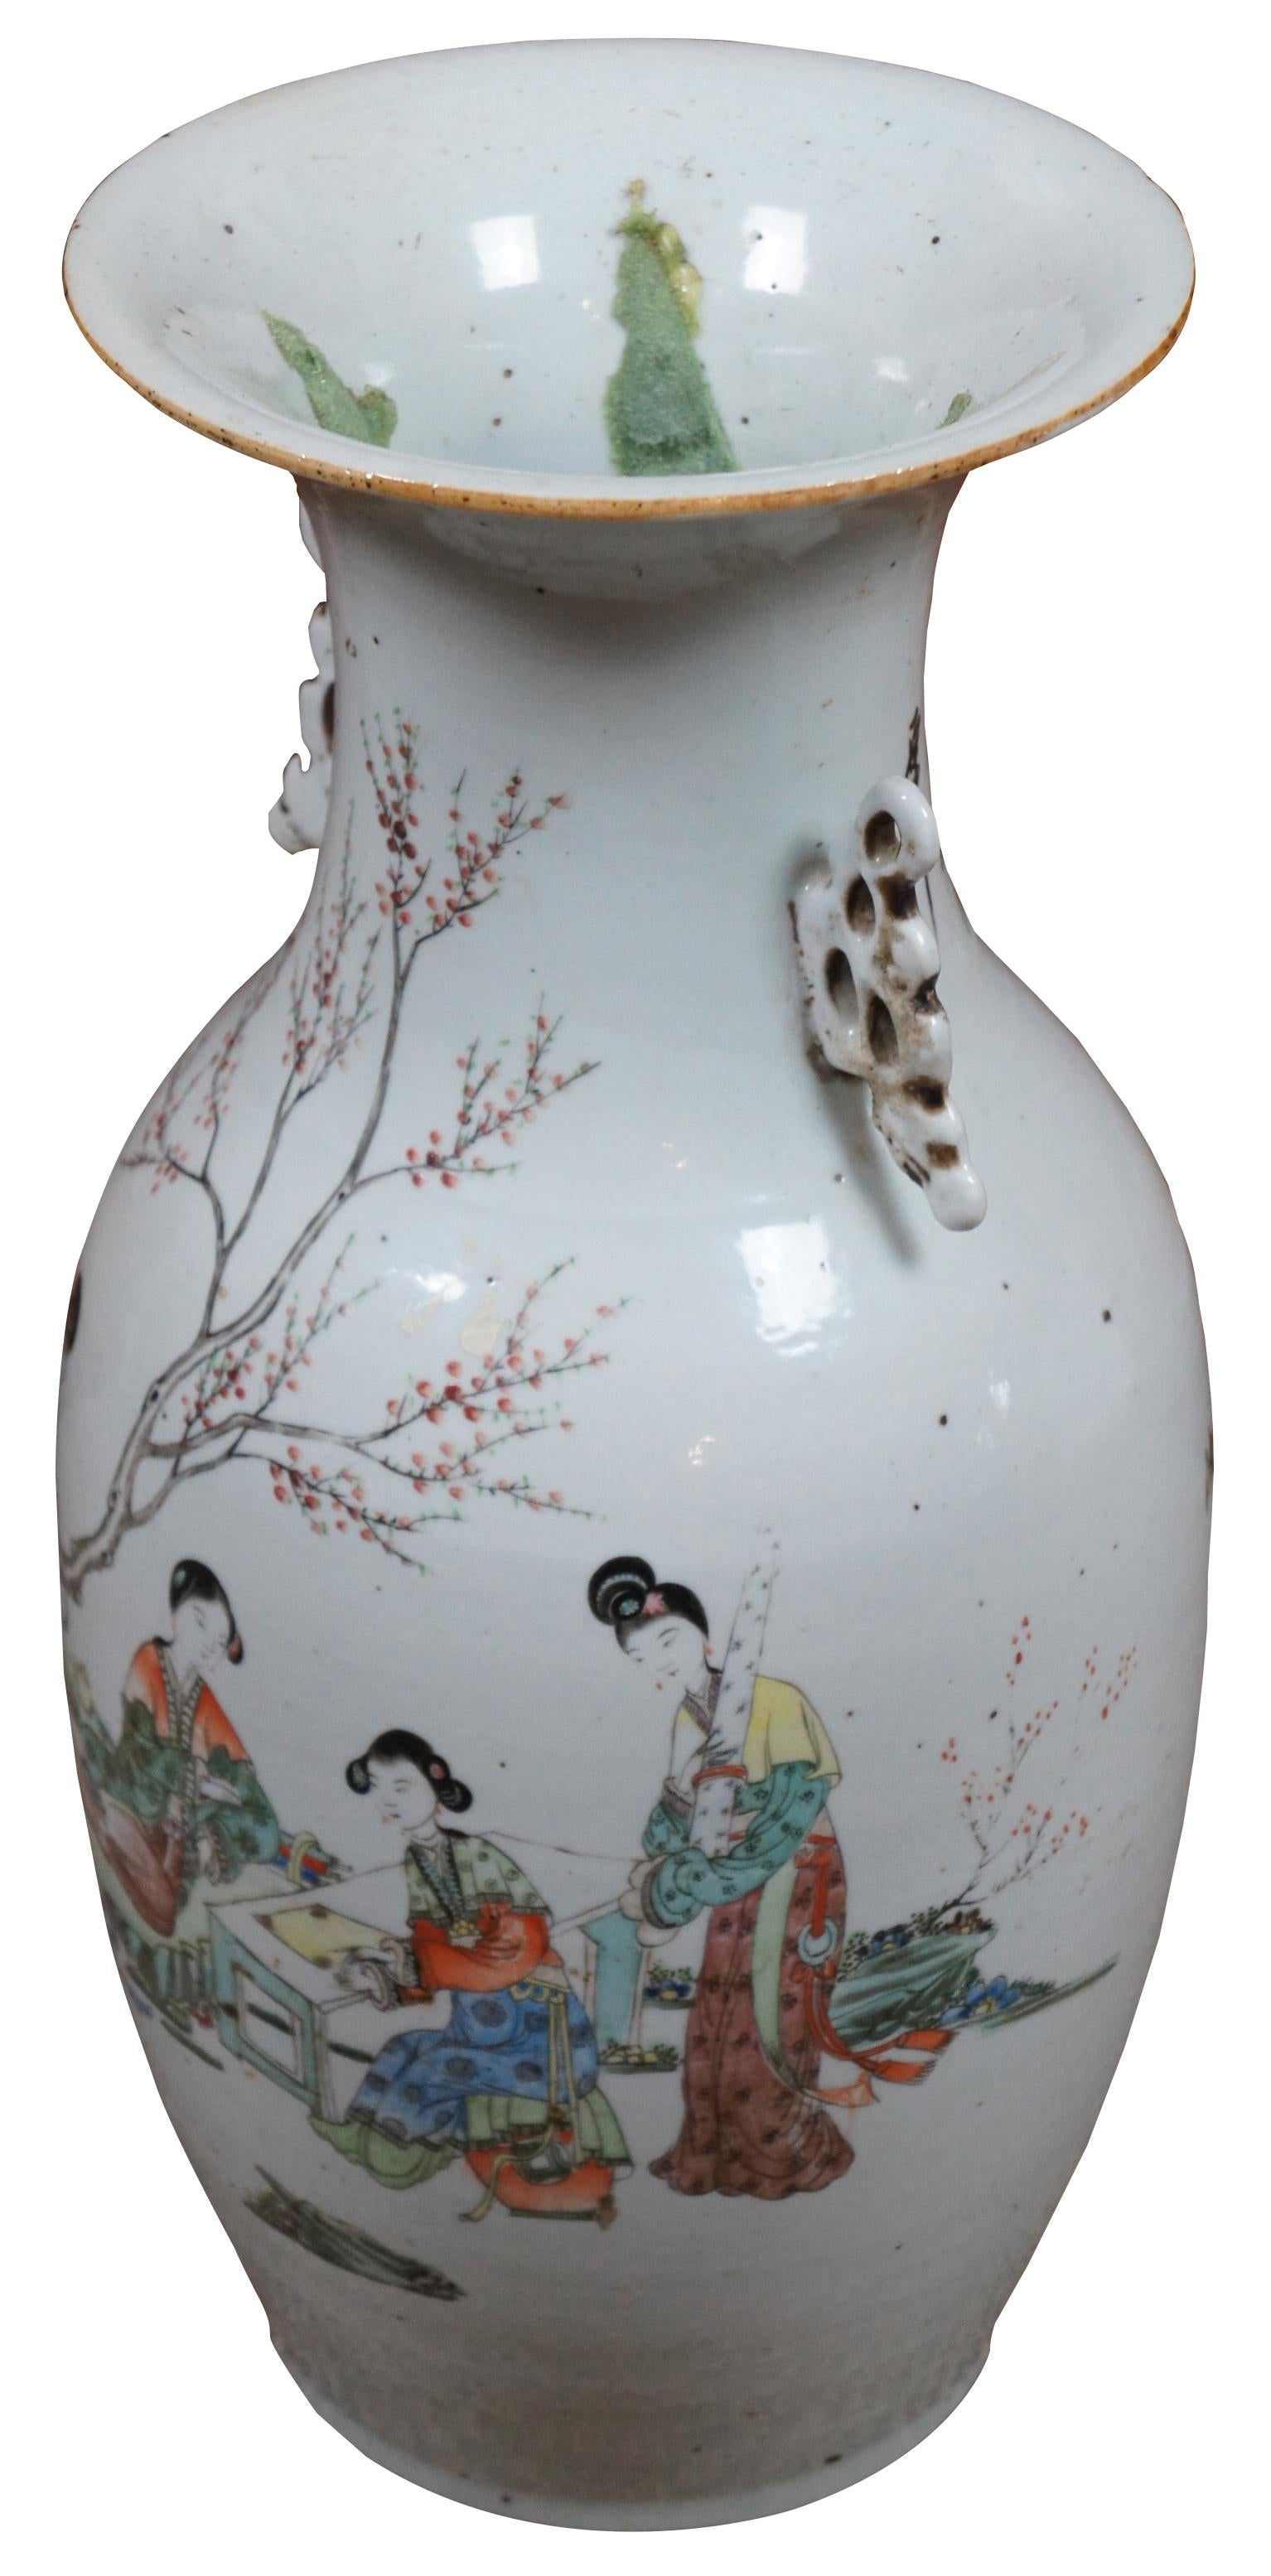 An impressive Antique 19th century Chinese polychrome floor vase with double handles, a scene of geisha figures seated in a garden, and calligraphy on the back. Measure: 17